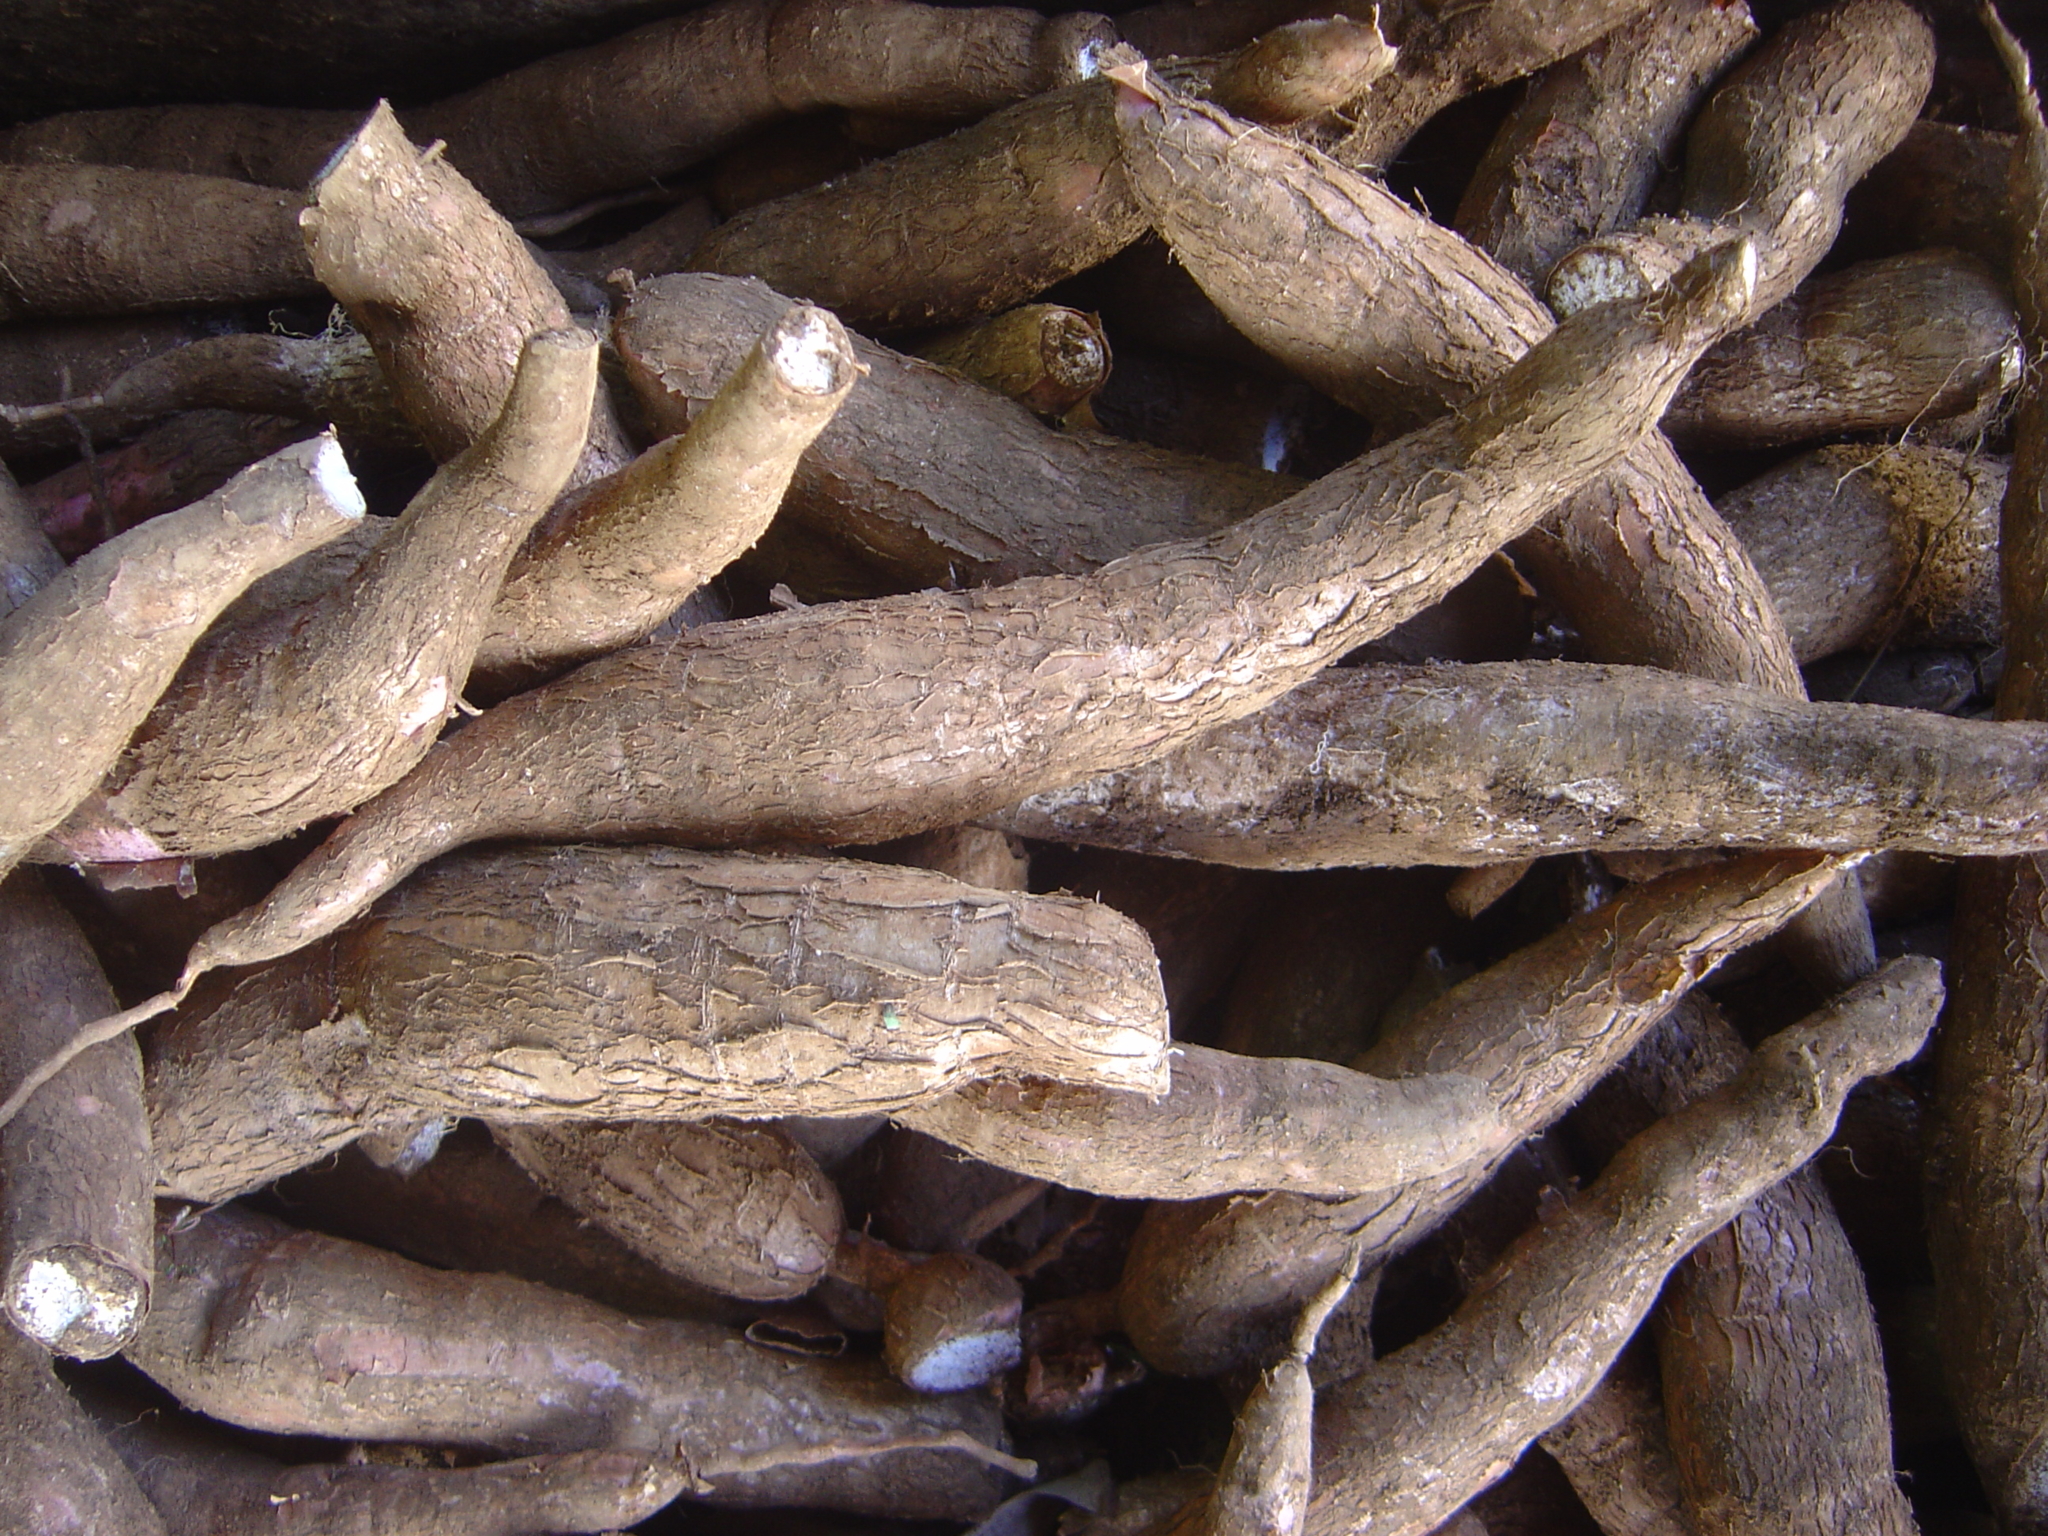 The photo shows a heap of short, thick manioc roots.